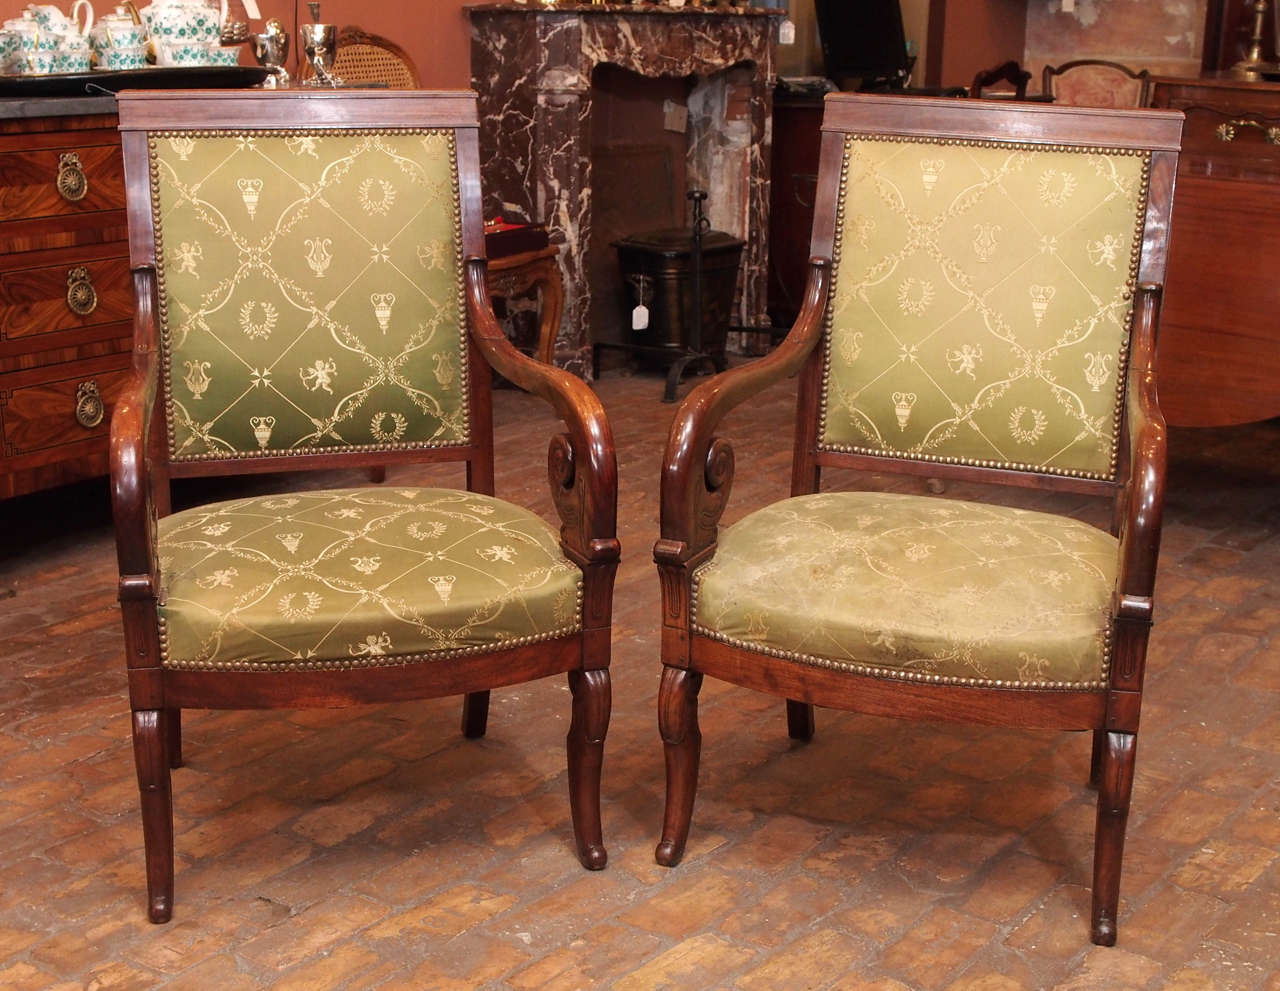 Pair of fine early 19th century French Restoration mahogany fauteuils with scroll arms and sabre legs, circa 1835